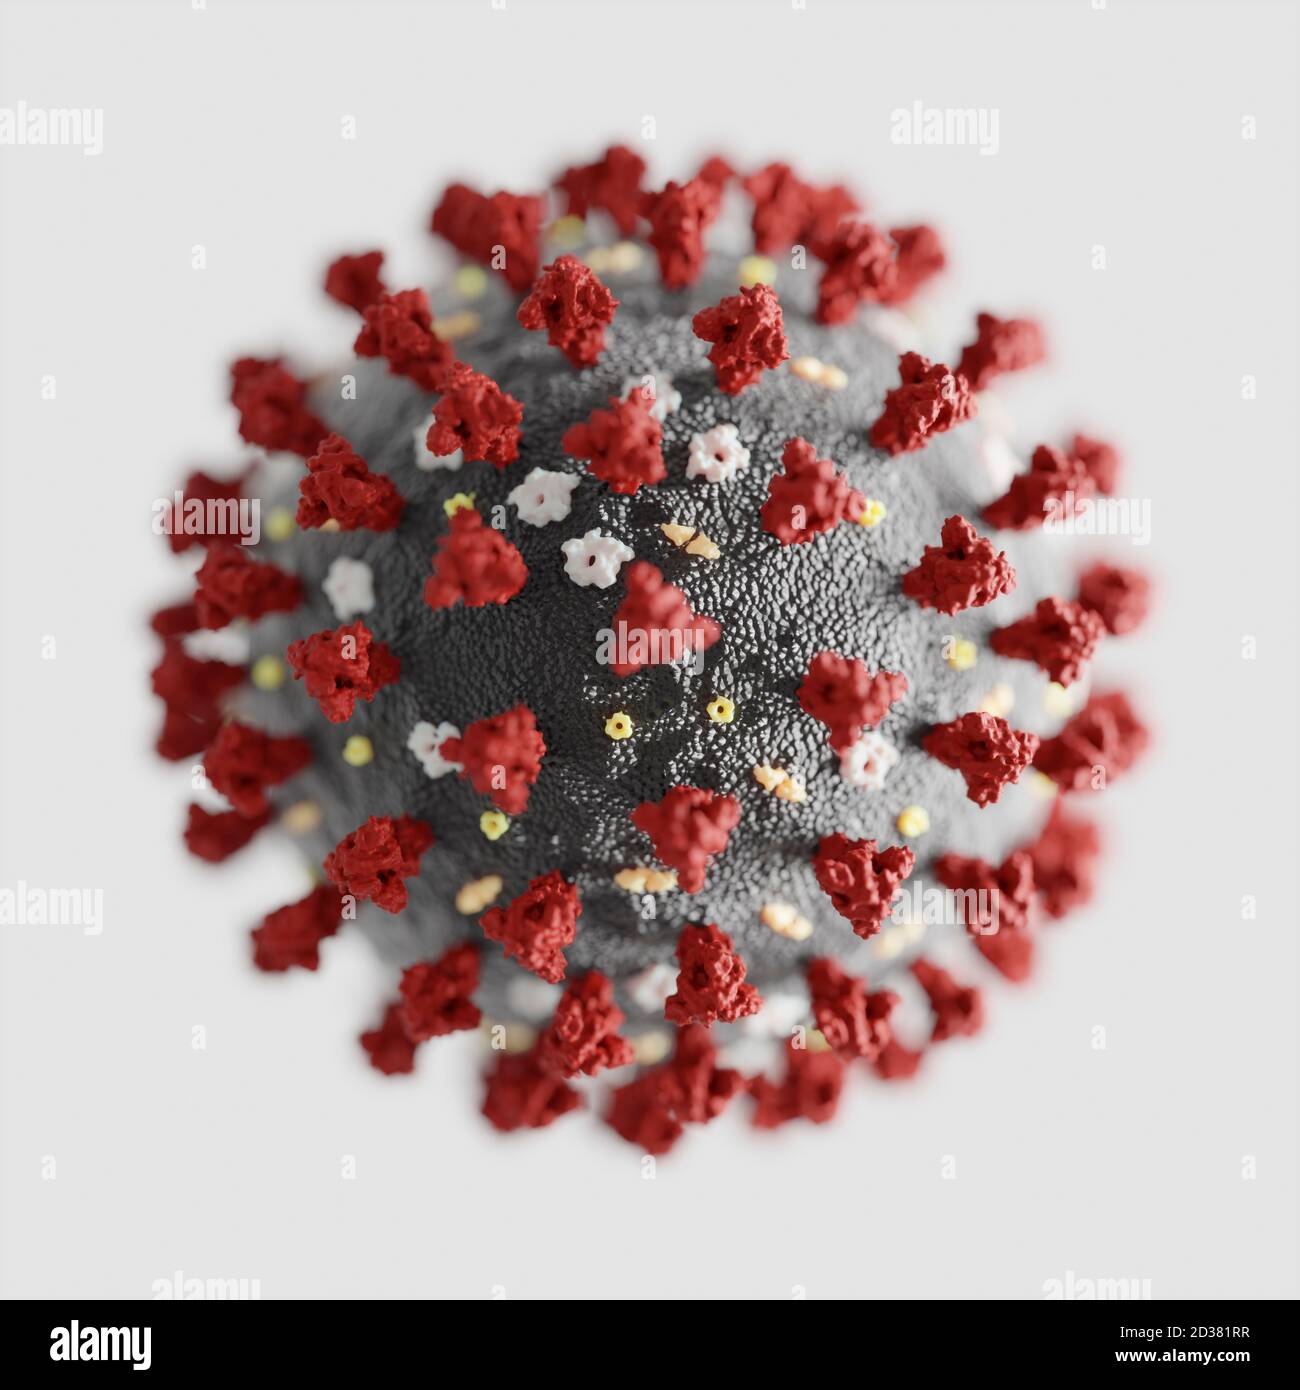 Corona virus particle (SARS-CoV-2, Covid 19). An accurate and updated 3d model based on scientific structural data from the Protein Data Bank. Stock Photo